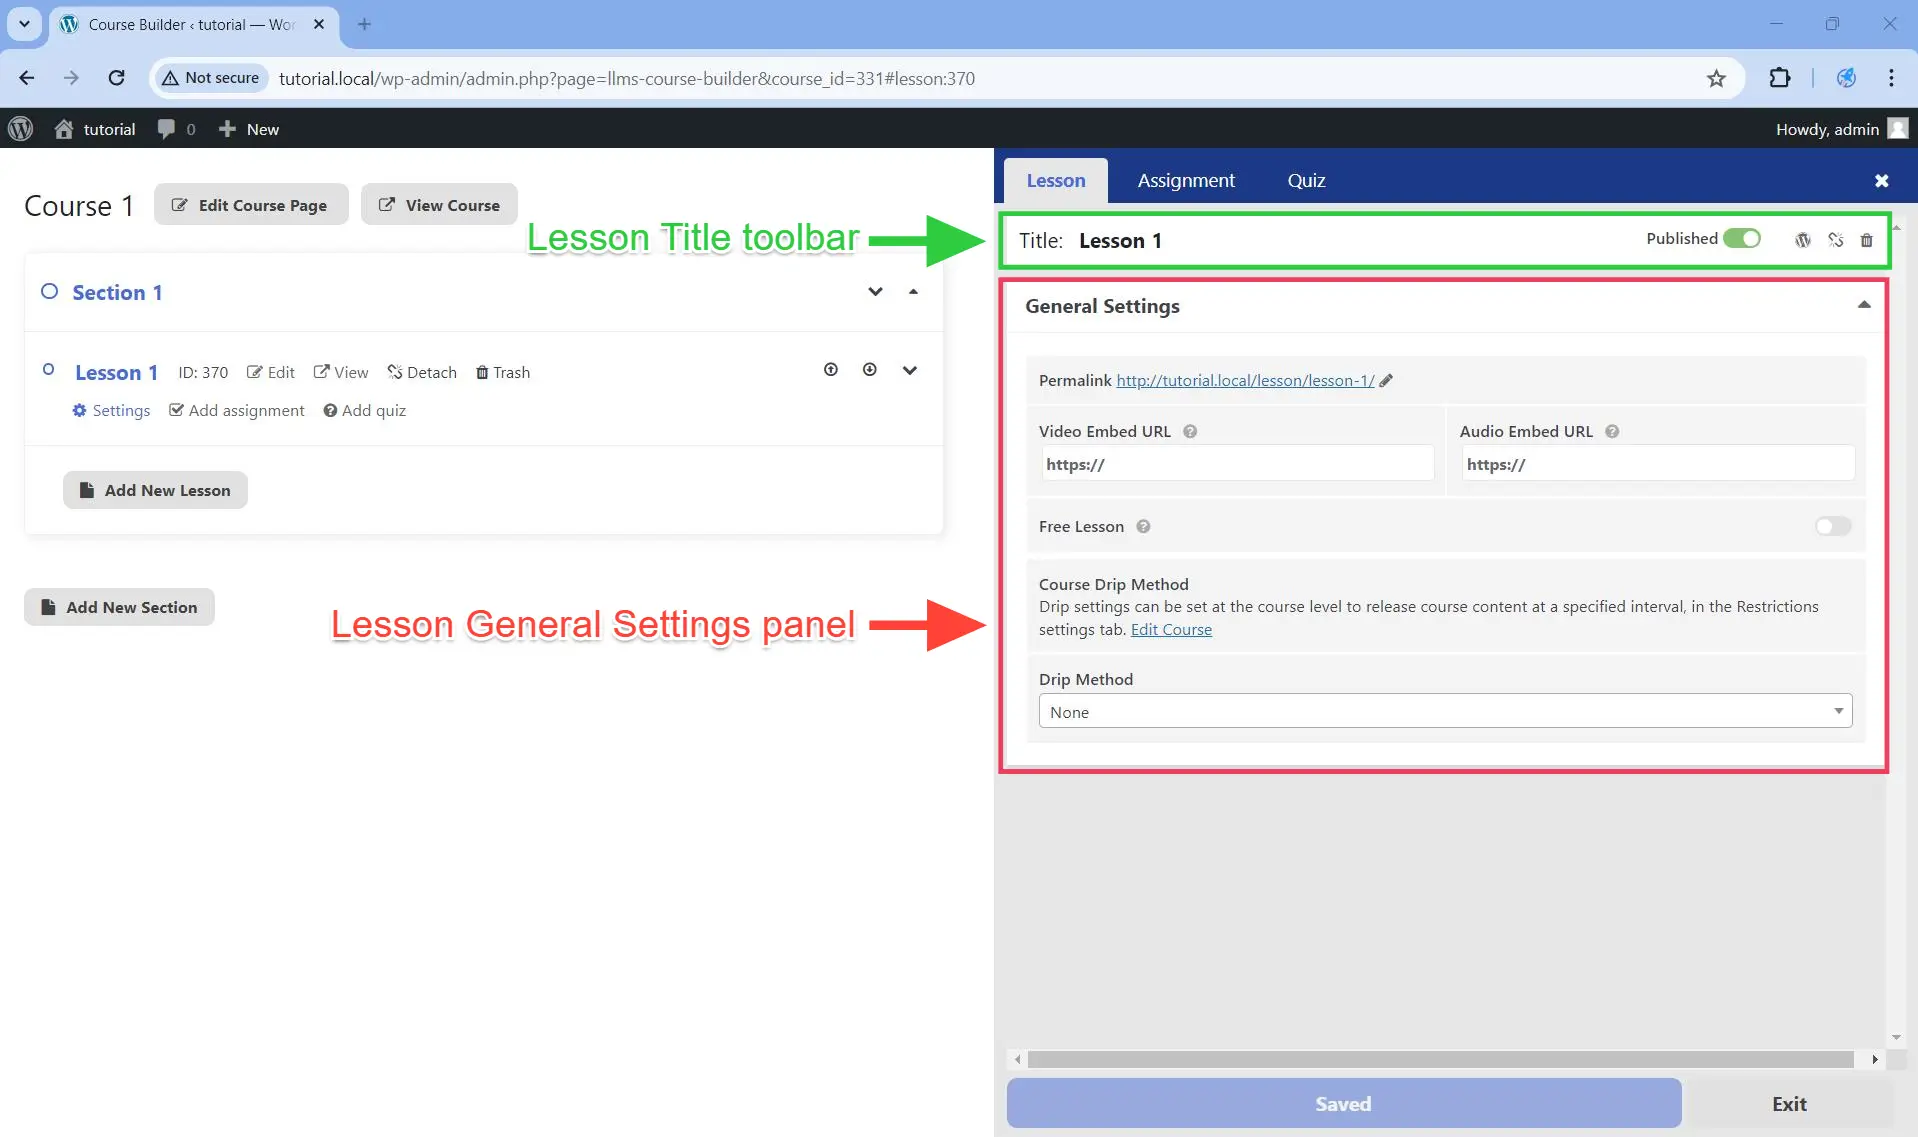 The Lesson tab is divided into two sections the Title toolbar and the General Settings panel